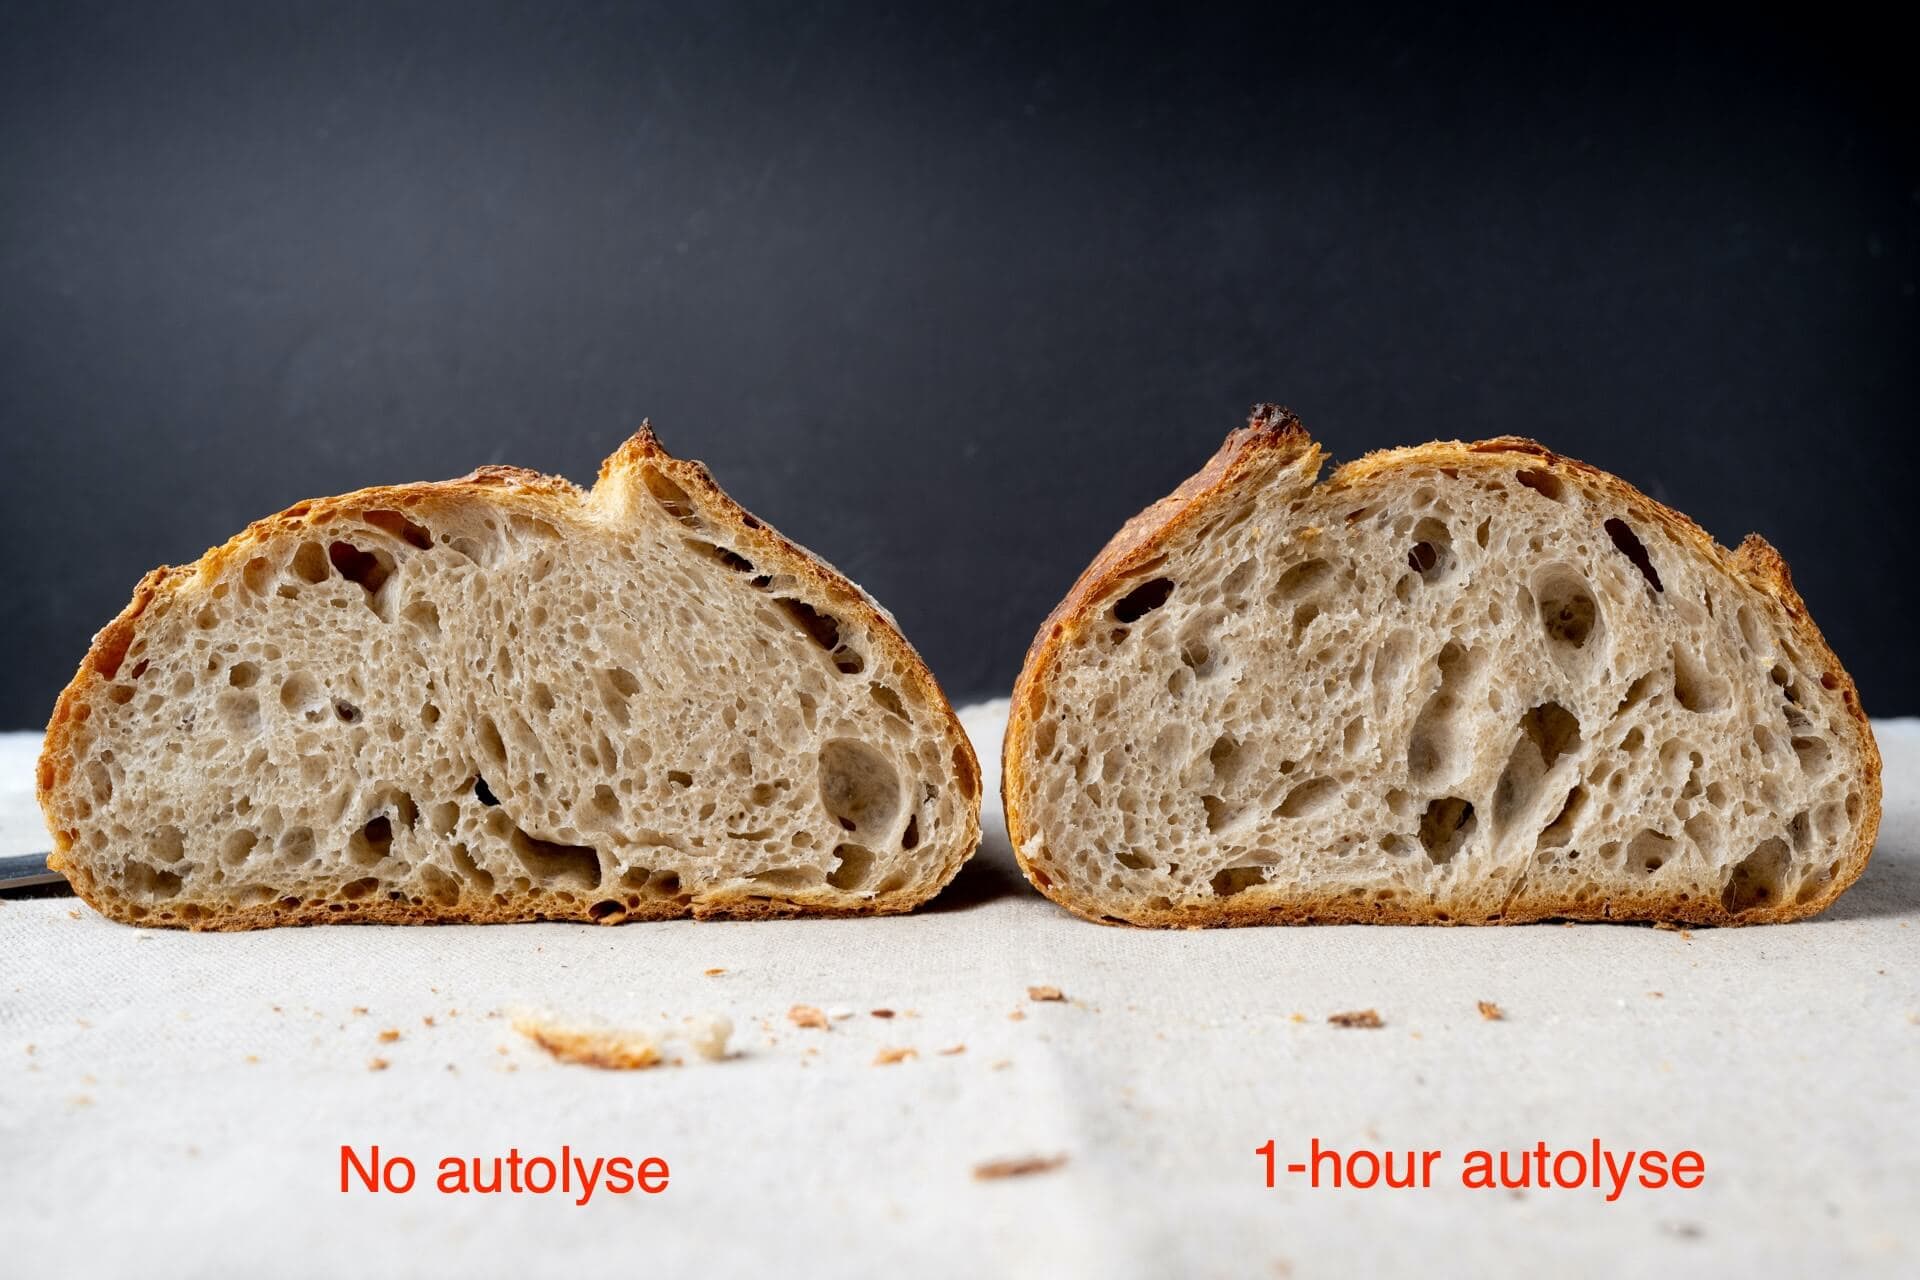 How to autolyse test bake